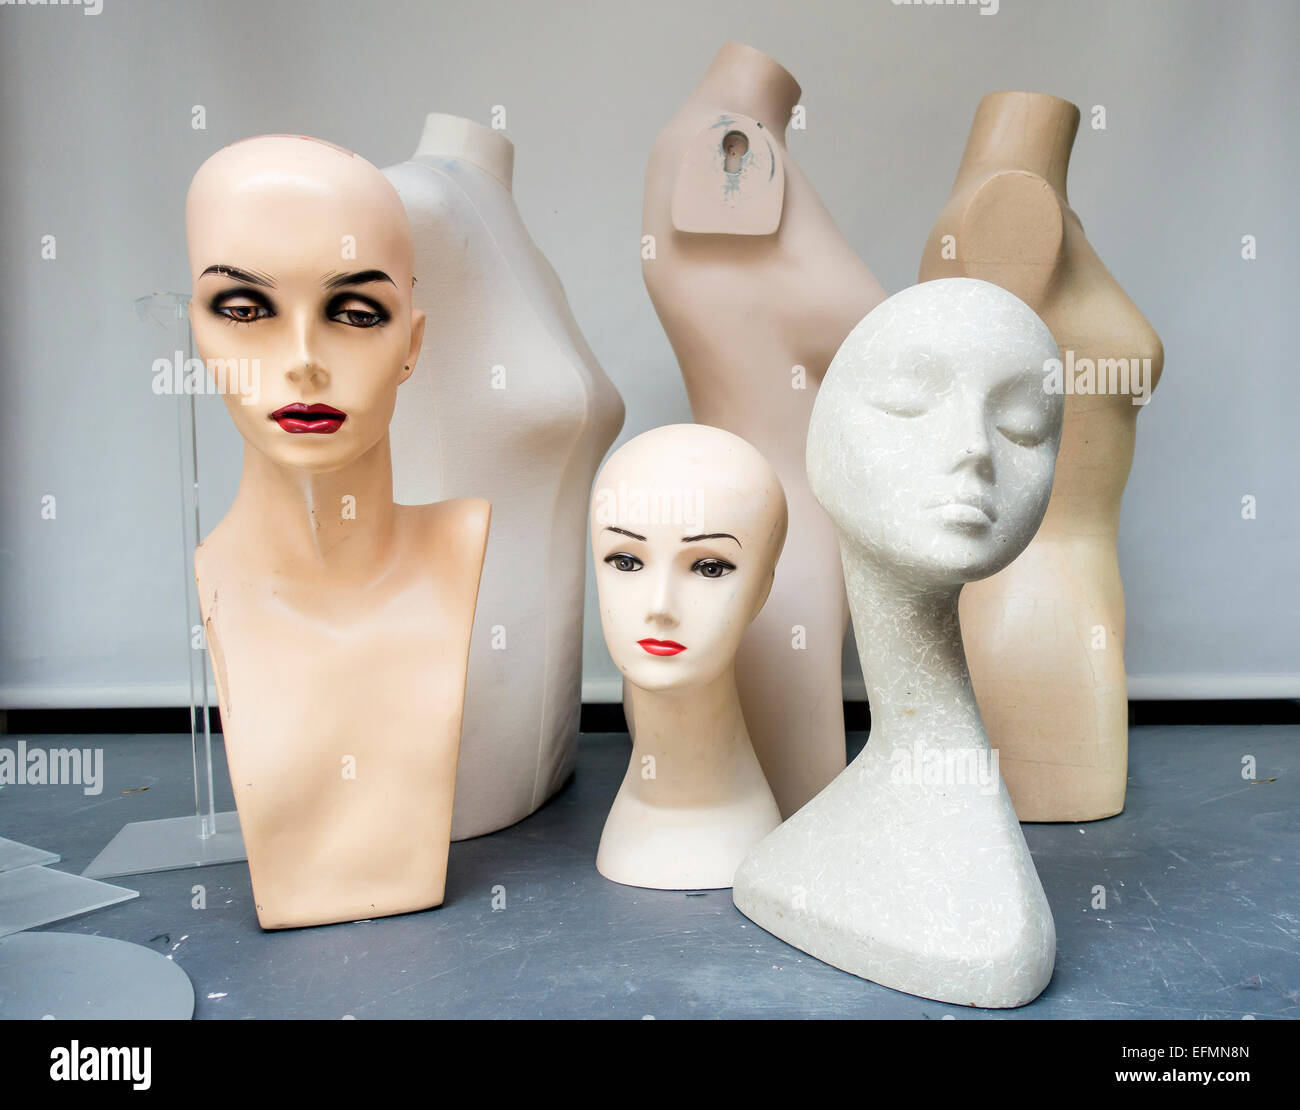 Old Display Fashion Manequins Closed Clothes Shop Stock Photo